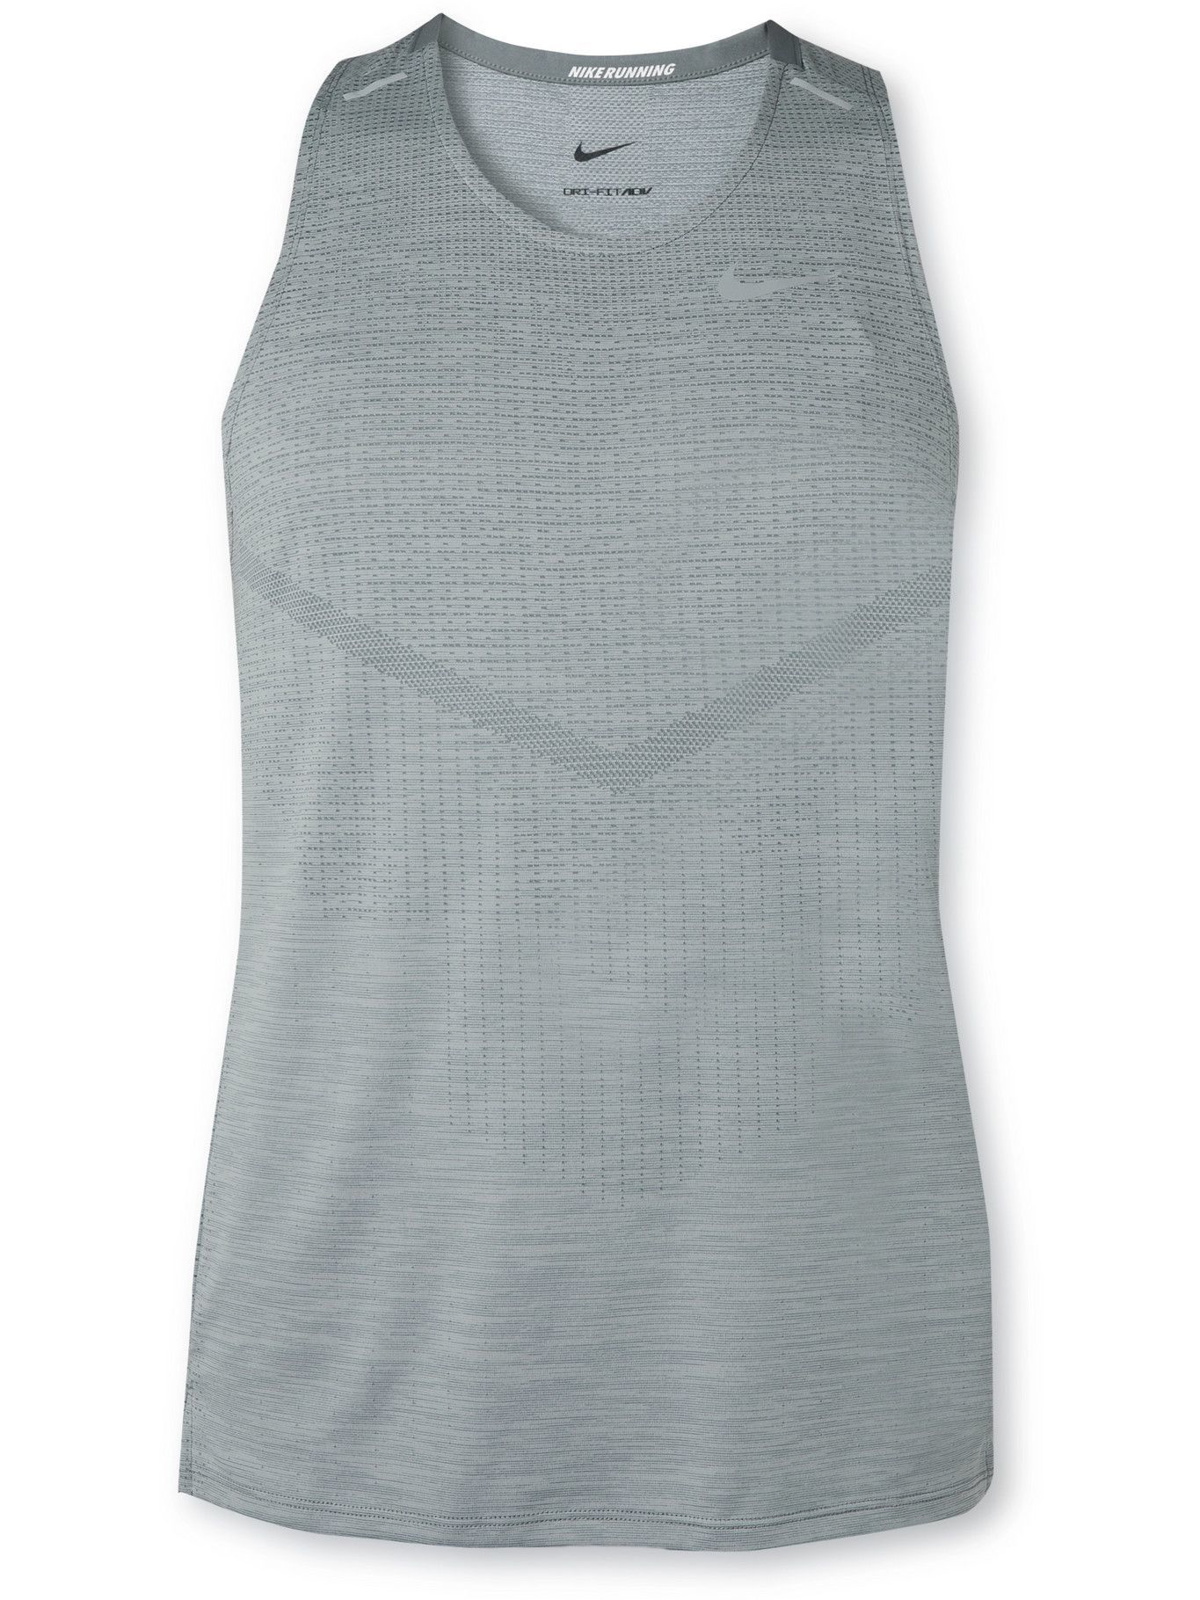 - TechKnit Ultra Perforated Recycled Dri-FIT Tank Top - Gray Nike